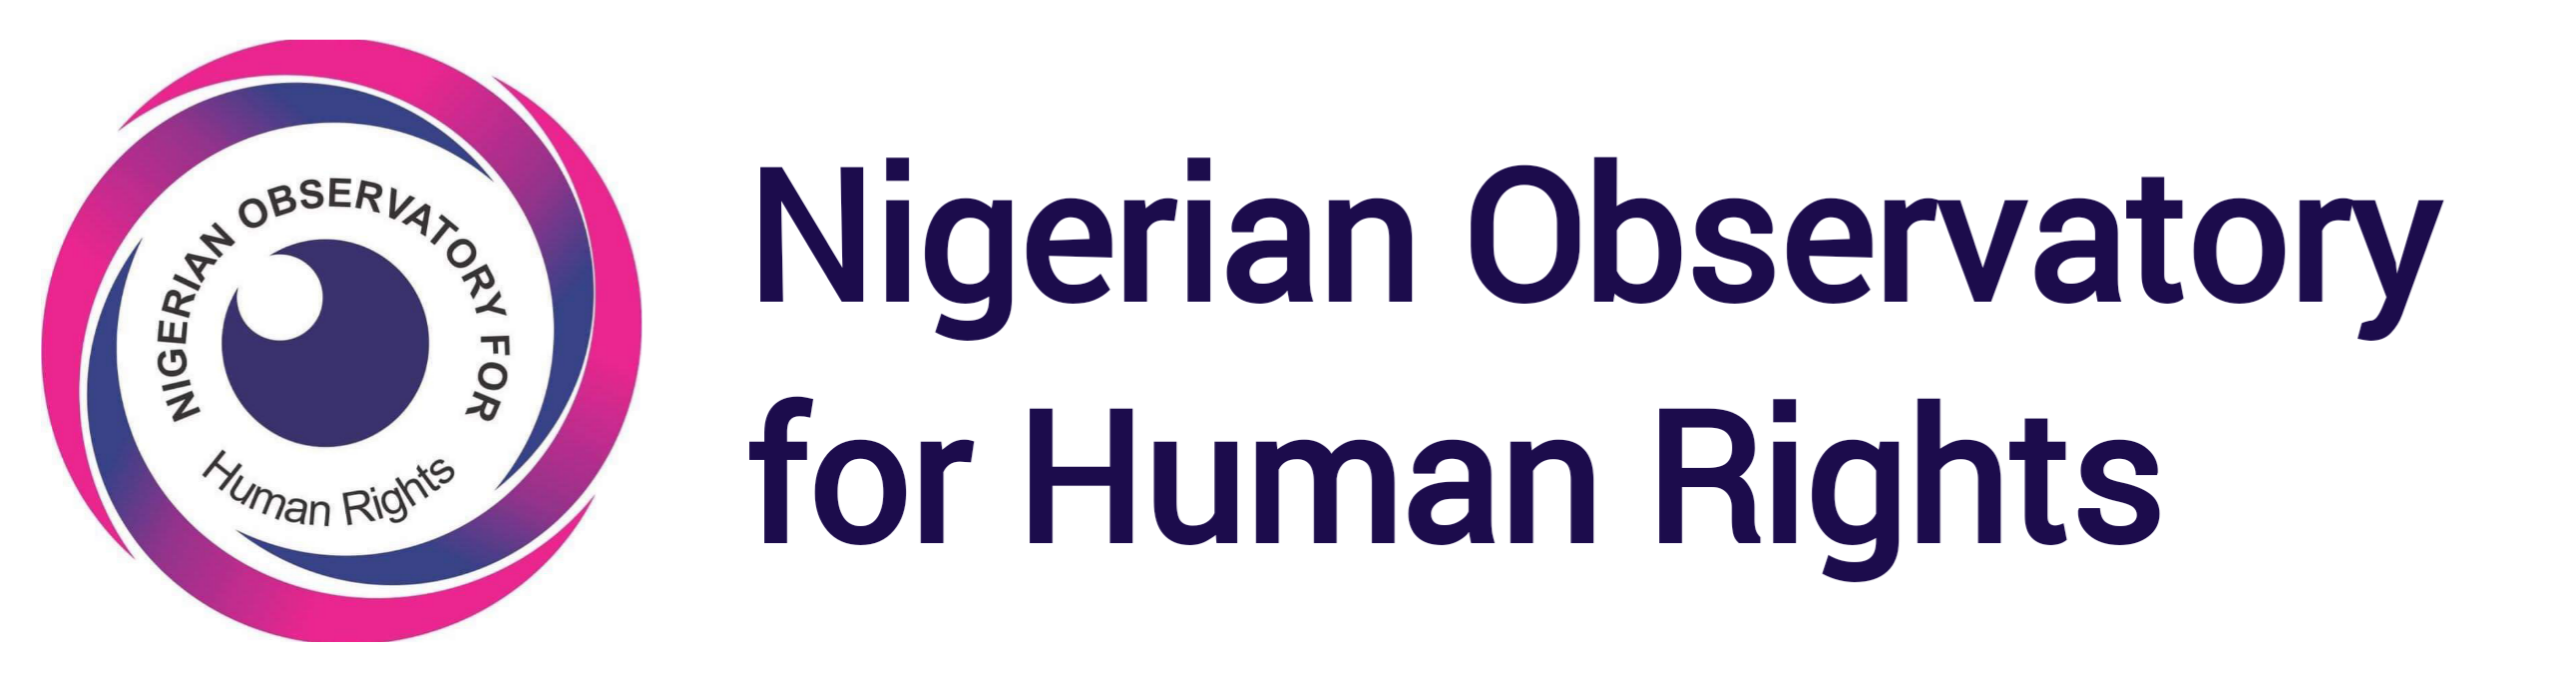 Nigerian Observatory For Human Rights